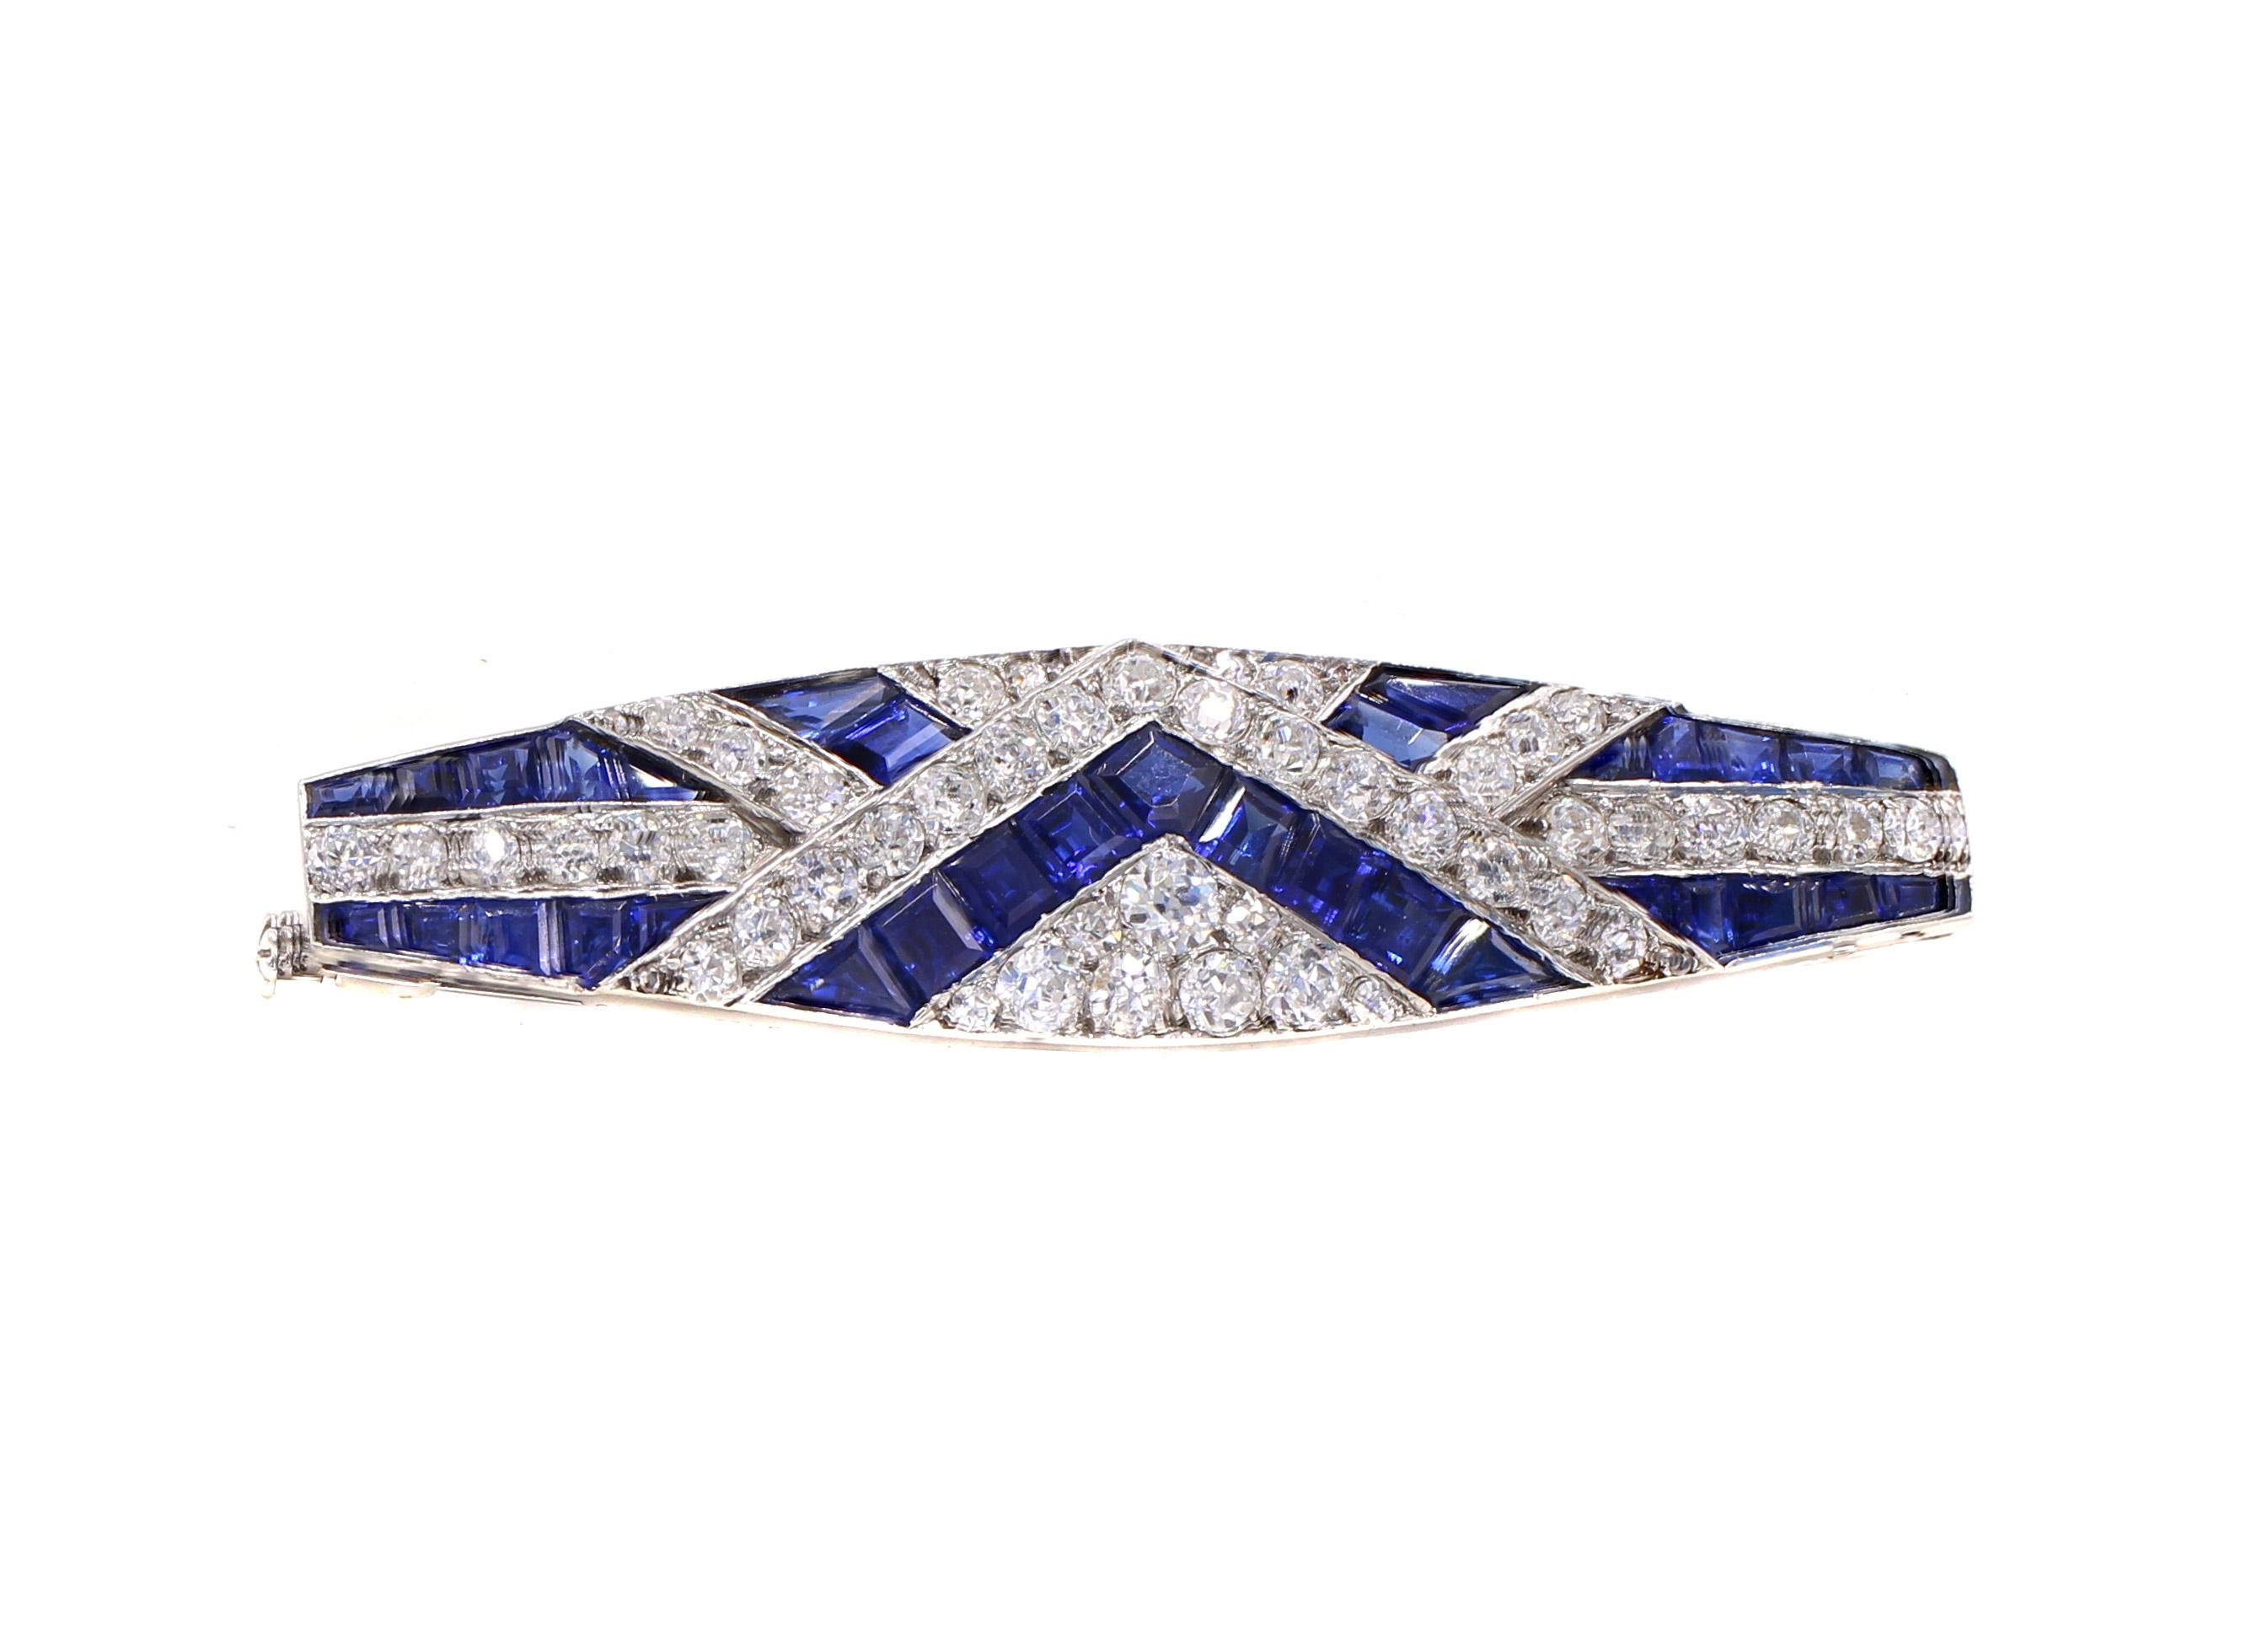 French Art Deco brooch form ca 1930, beautifully designed and masterfully handcrafted in platinum The strong geometric design was the signature of the Art Deco period which is presented in this brooch with magnificent royal blue sapphires perfectly